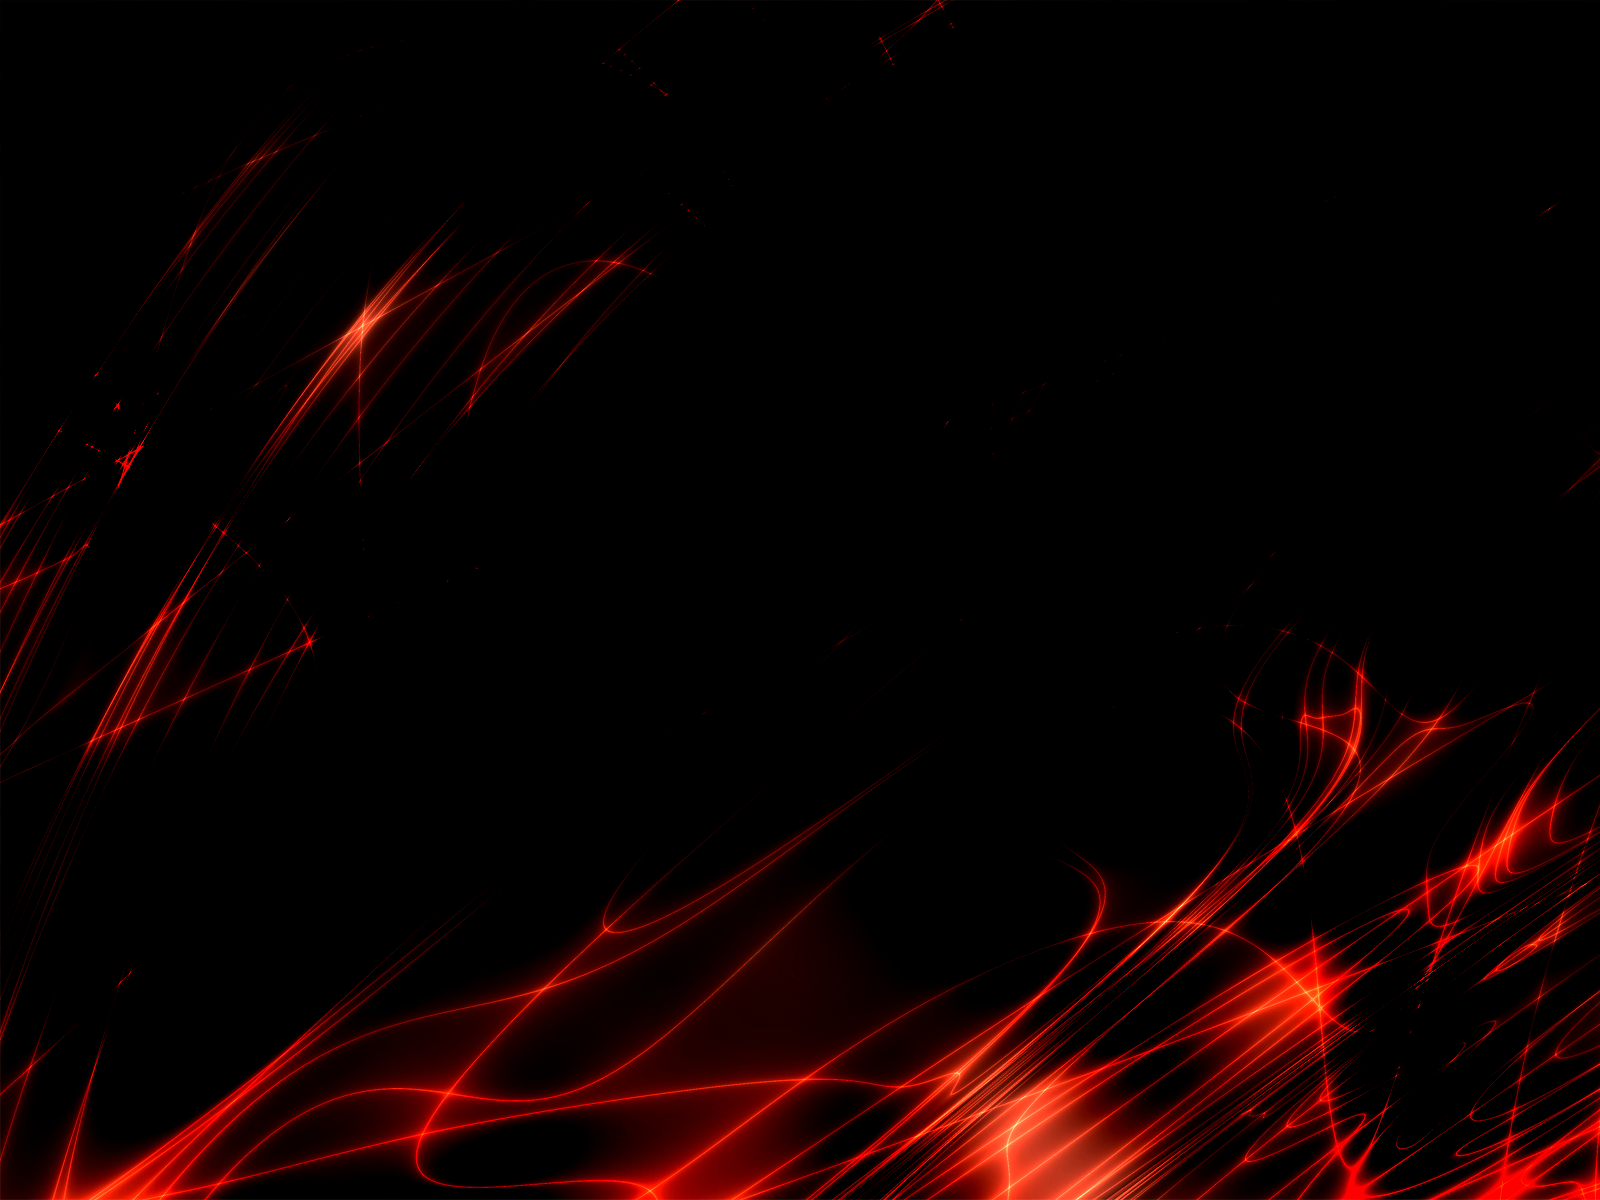 cool red and black abstract backgrounds